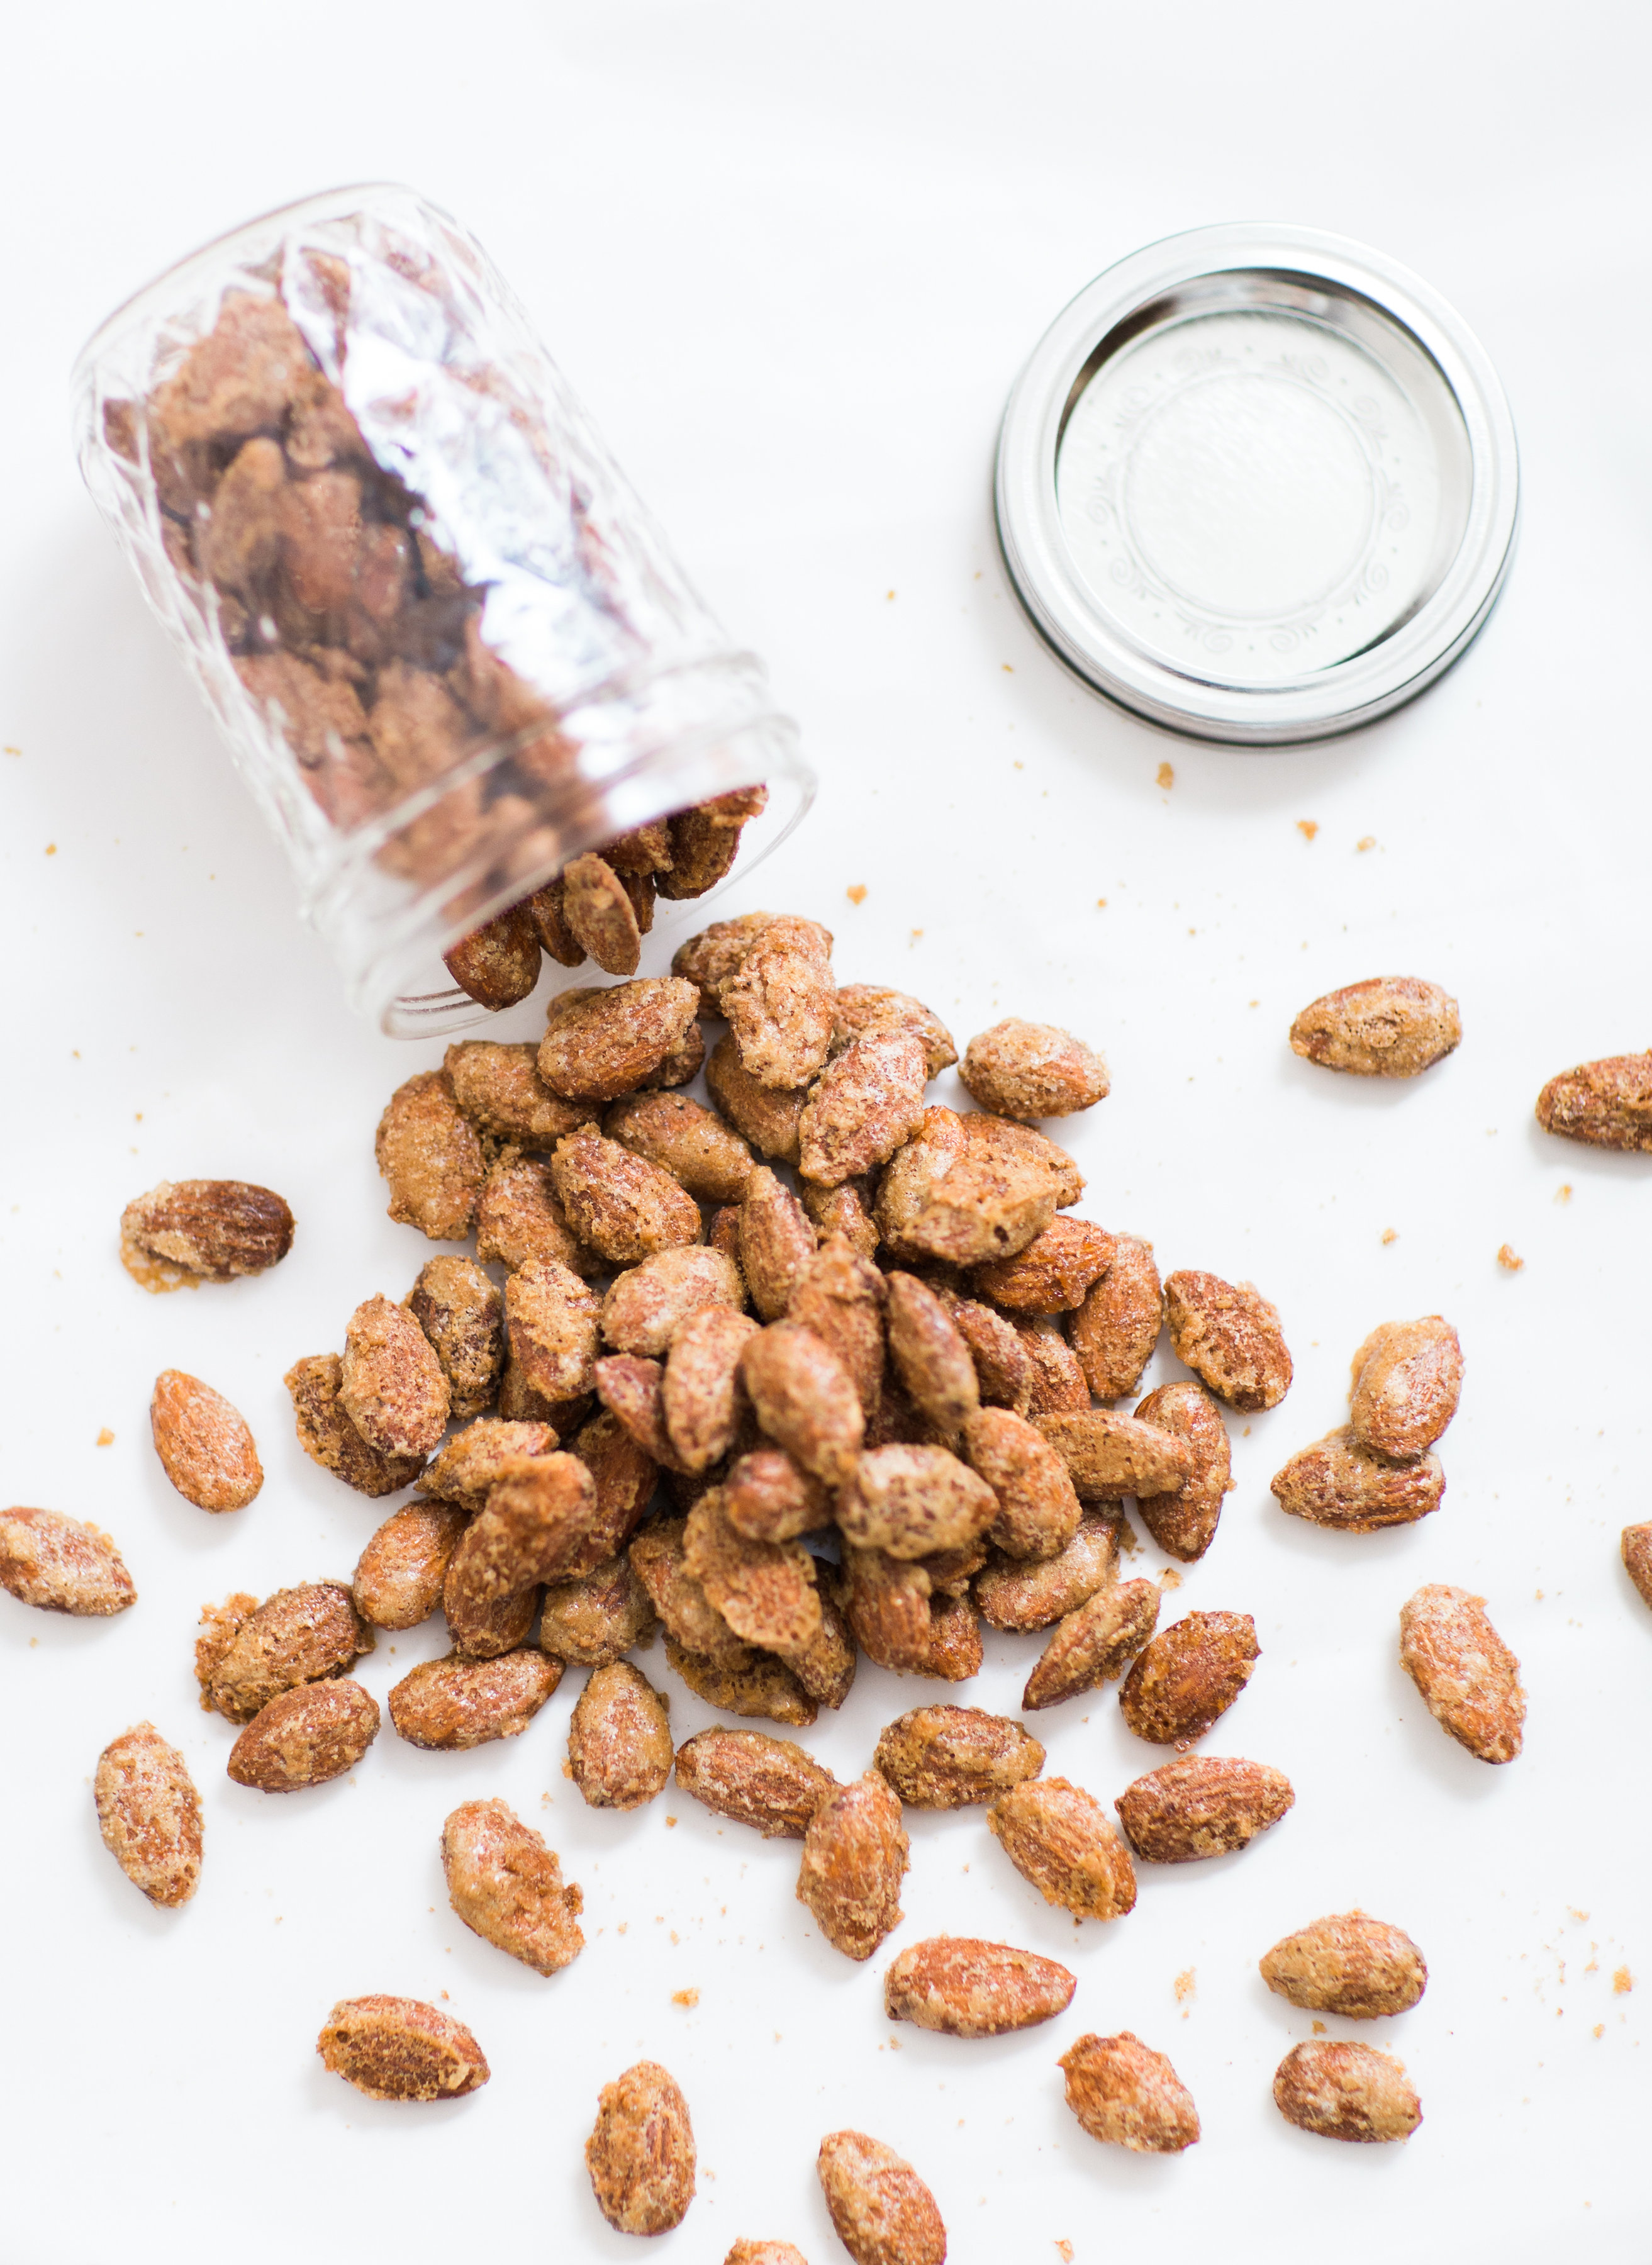 How to make candied cinnamon-roasted almonds. Click through for the simple and amazing recipe. #candiednuts #candiedalmonds #holidays #theholidays #holidaygifts #christmasgifts #cinnamonroastedalmonds #cinnamonroastednuts | glitterinc.com | @glitterinc